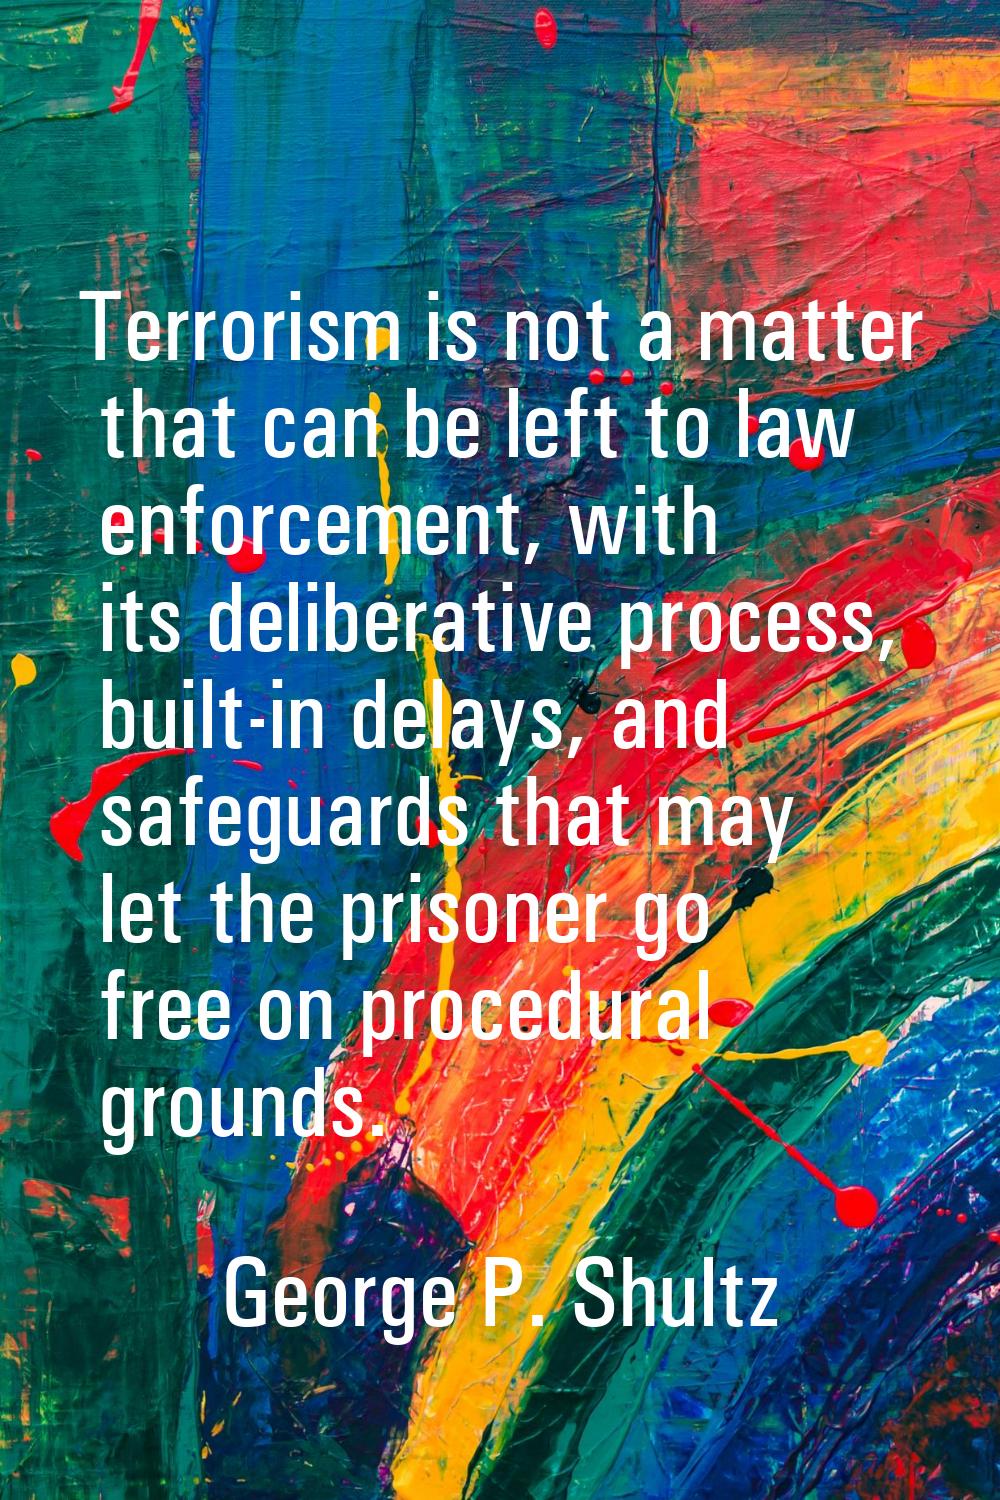 Terrorism is not a matter that can be left to law enforcement, with its deliberative process, built